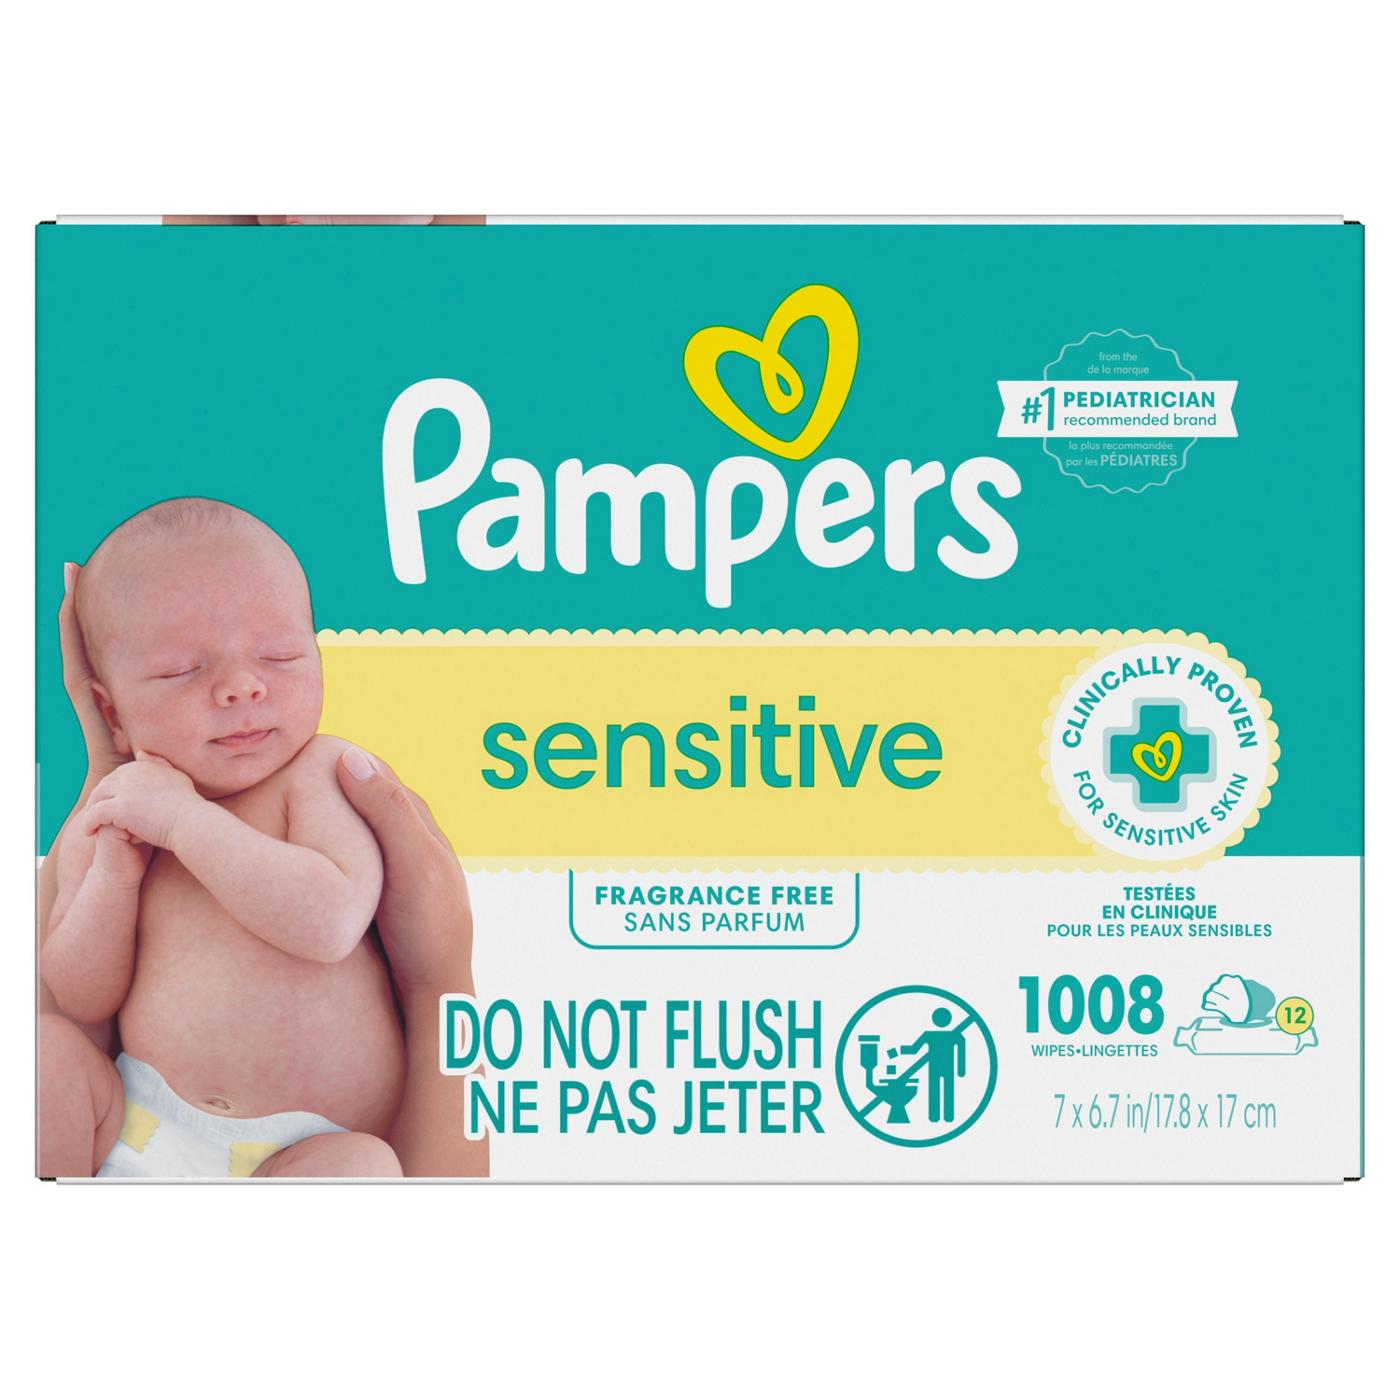 Pampers Sensitive Wipes 12 pk - Fragrance Free; image 4 of 10